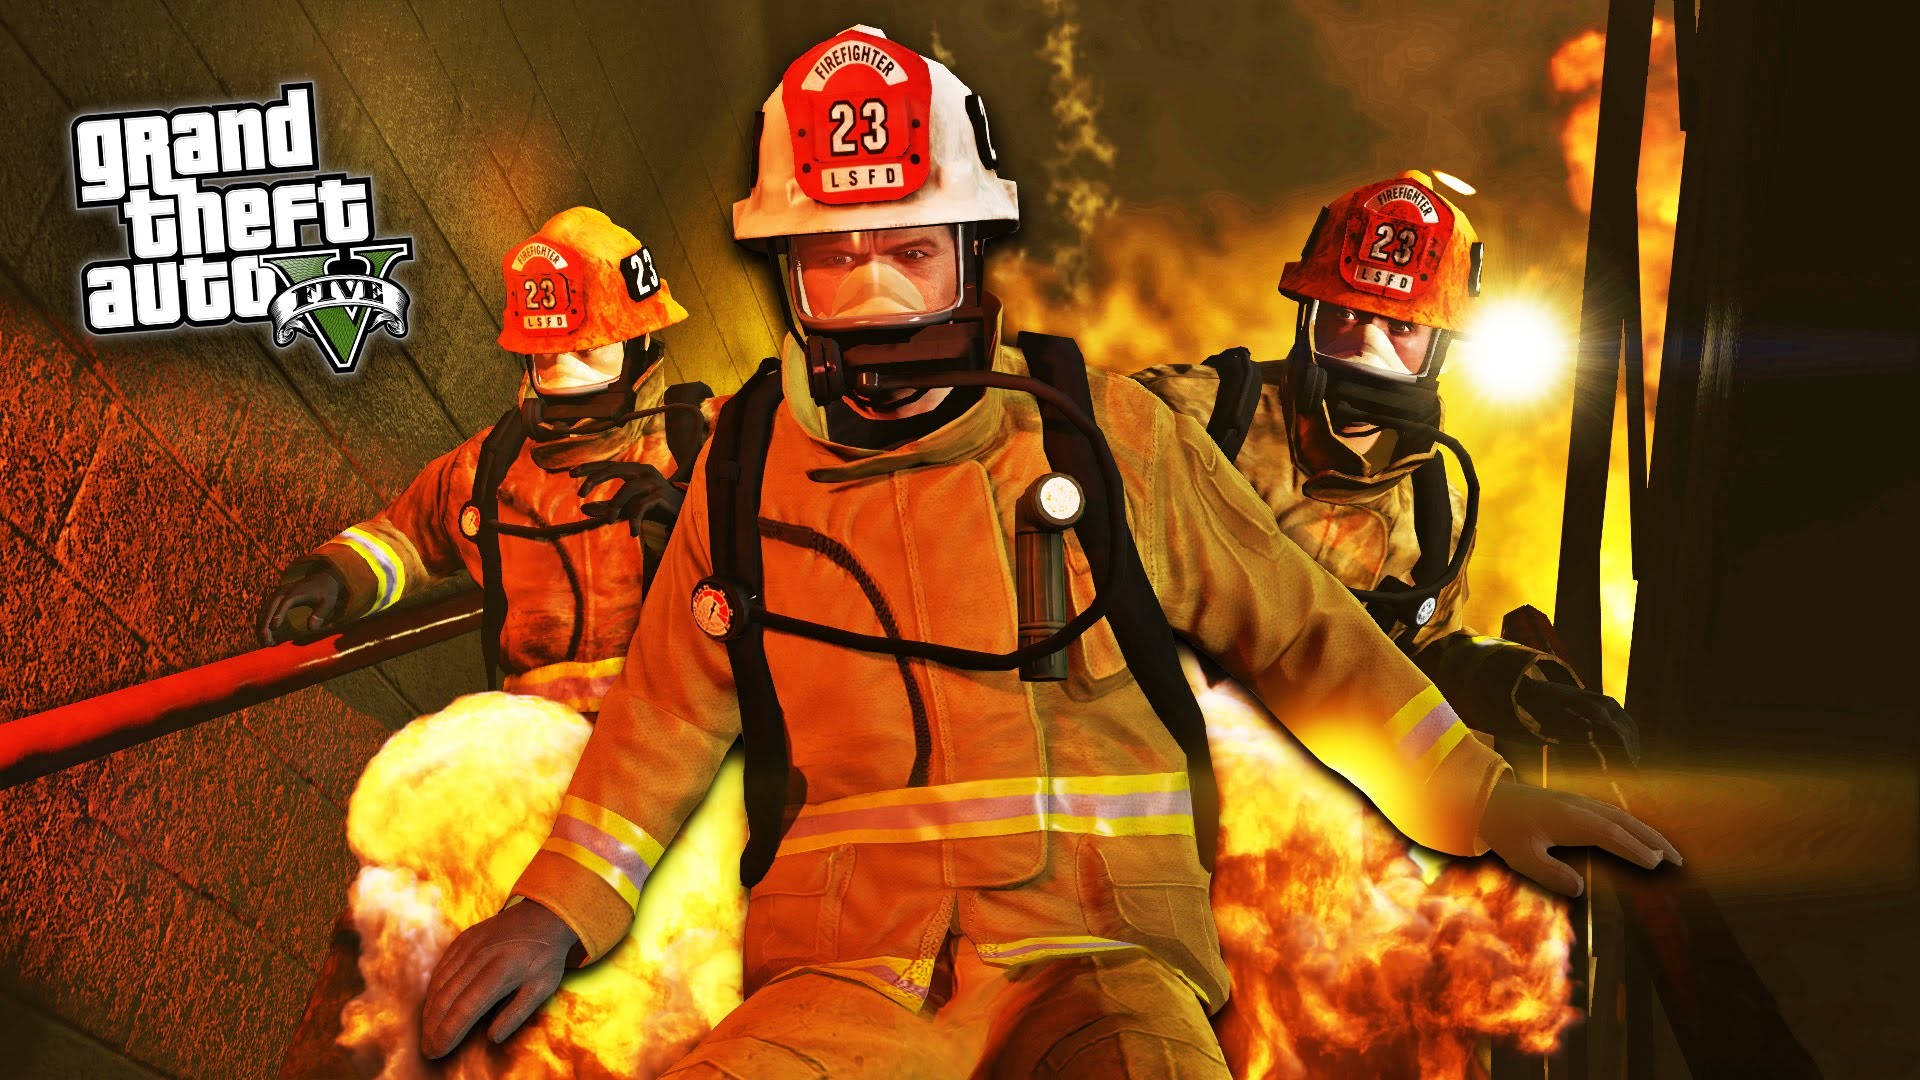 Fireman In The Online Game Grand Theft Auto V Wallpaper